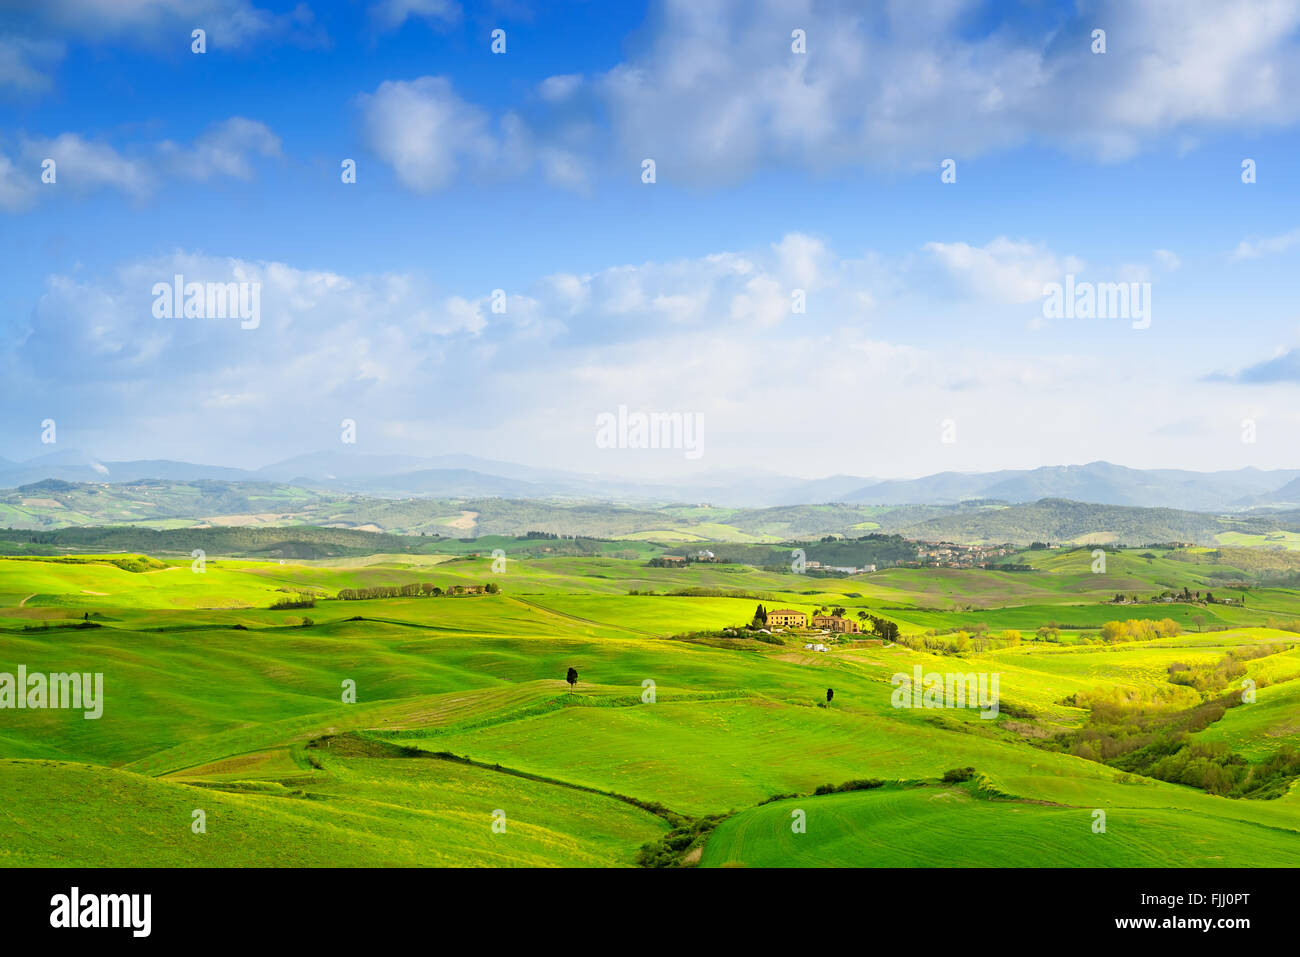 Tuscany, rural landscape of Tuscany with yellow and green field. Rolling hills near Volterra, Italy. Europe. Stock Photo